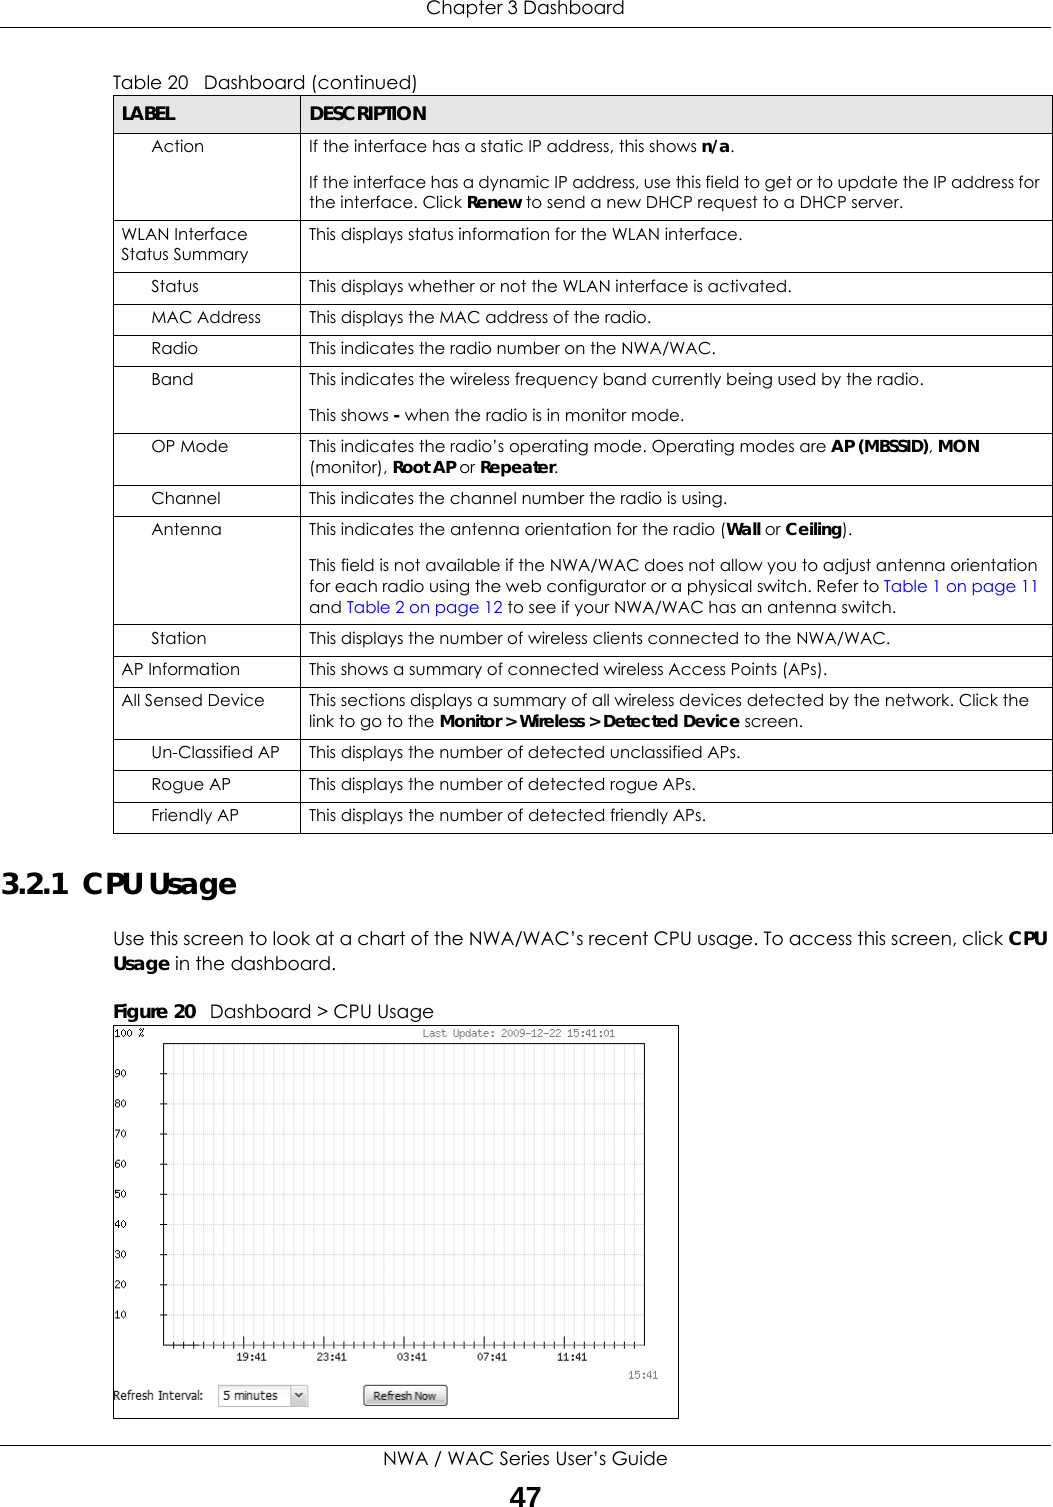 Chapter 3 DashboardNWA / WAC Series User’s Guide473.2.1  CPU UsageUse this screen to look at a chart of the NWA/WAC’s recent CPU usage. To access this screen, click CPU Usage in the dashboard.Figure 20   Dashboard &gt; CPU UsageAction If the interface has a static IP address, this shows n/a. If the interface has a dynamic IP address, use this field to get or to update the IP address for the interface. Click Renew to send a new DHCP request to a DHCP server. WLAN Interface Status SummaryThis displays status information for the WLAN interface.Status This displays whether or not the WLAN interface is activated.MAC Address This displays the MAC address of the radio.Radio This indicates the radio number on the NWA/WAC.Band This indicates the wireless frequency band currently being used by the radio. This shows - when the radio is in monitor mode.OP Mode This indicates the radio’s operating mode. Operating modes are AP (MBSSID), MON (monitor), Root AP or Repeater.Channel This indicates the channel number the radio is using.Antenna This indicates the antenna orientation for the radio (Wall or Ceiling).This field is not available if the NWA/WAC does not allow you to adjust antenna orientation for each radio using the web configurator or a physical switch. Refer to Table 1 on page 11 and Table 2 on page 12 to see if your NWA/WAC has an antenna switch.Station This displays the number of wireless clients connected to the NWA/WAC.AP Information This shows a summary of connected wireless Access Points (APs). All Sensed Device This sections displays a summary of all wireless devices detected by the network. Click the link to go to the Monitor &gt; Wireless &gt; Detected Device screen.Un-Classified AP This displays the number of detected unclassified APs.Rogue AP This displays the number of detected rogue APs.Friendly AP This displays the number of detected friendly APs.Table 20   Dashboard (continued)LABEL DESCRIPTION